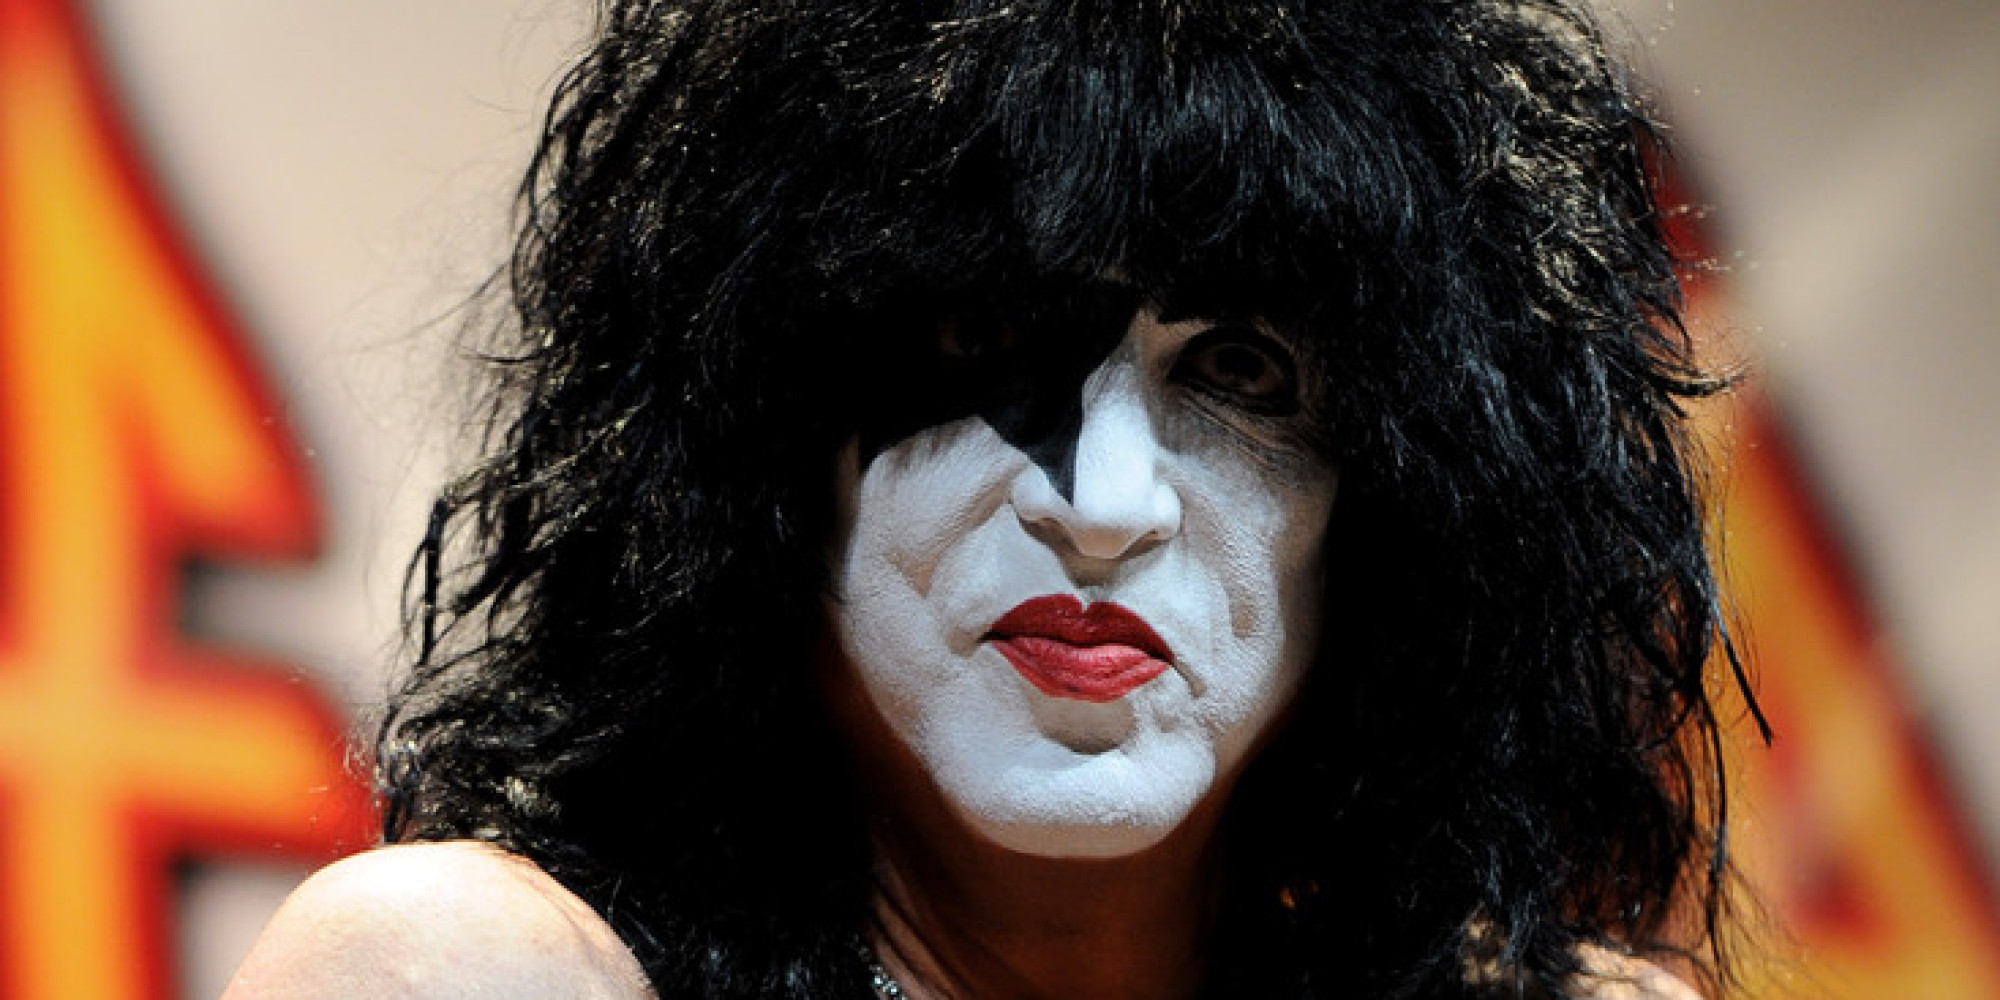 KISS Superstar says Charity is “not an Option”